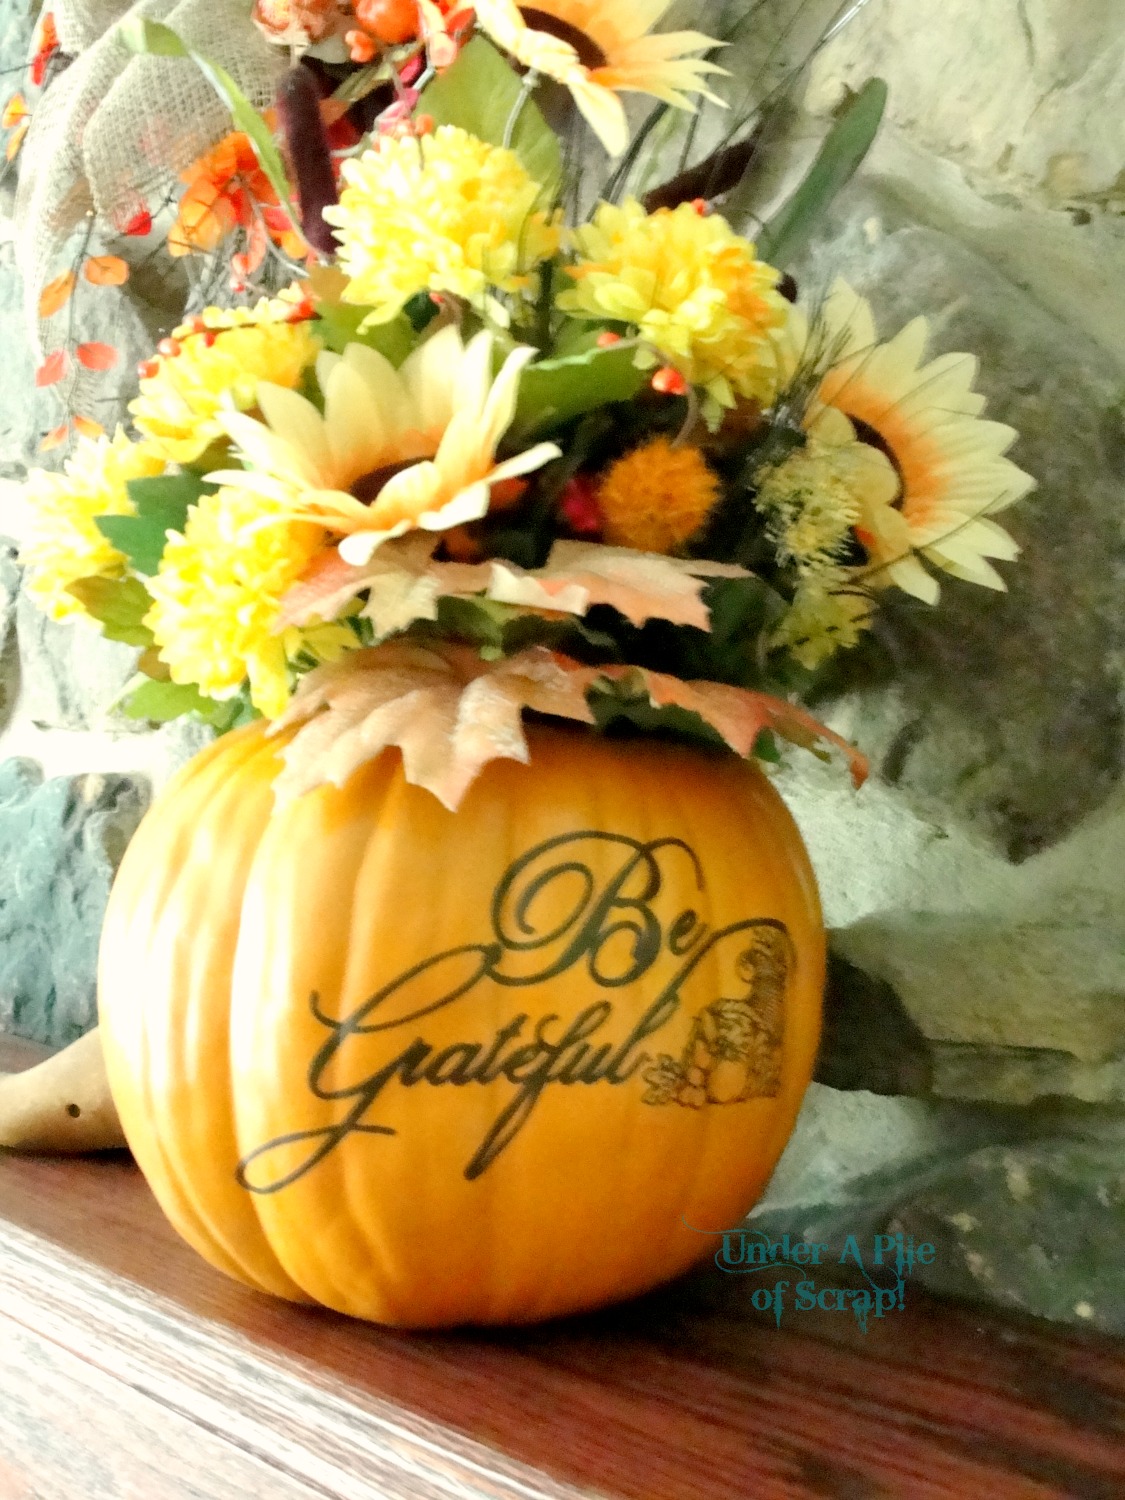 Under A Pile of Scrap!: Fall Decor & More